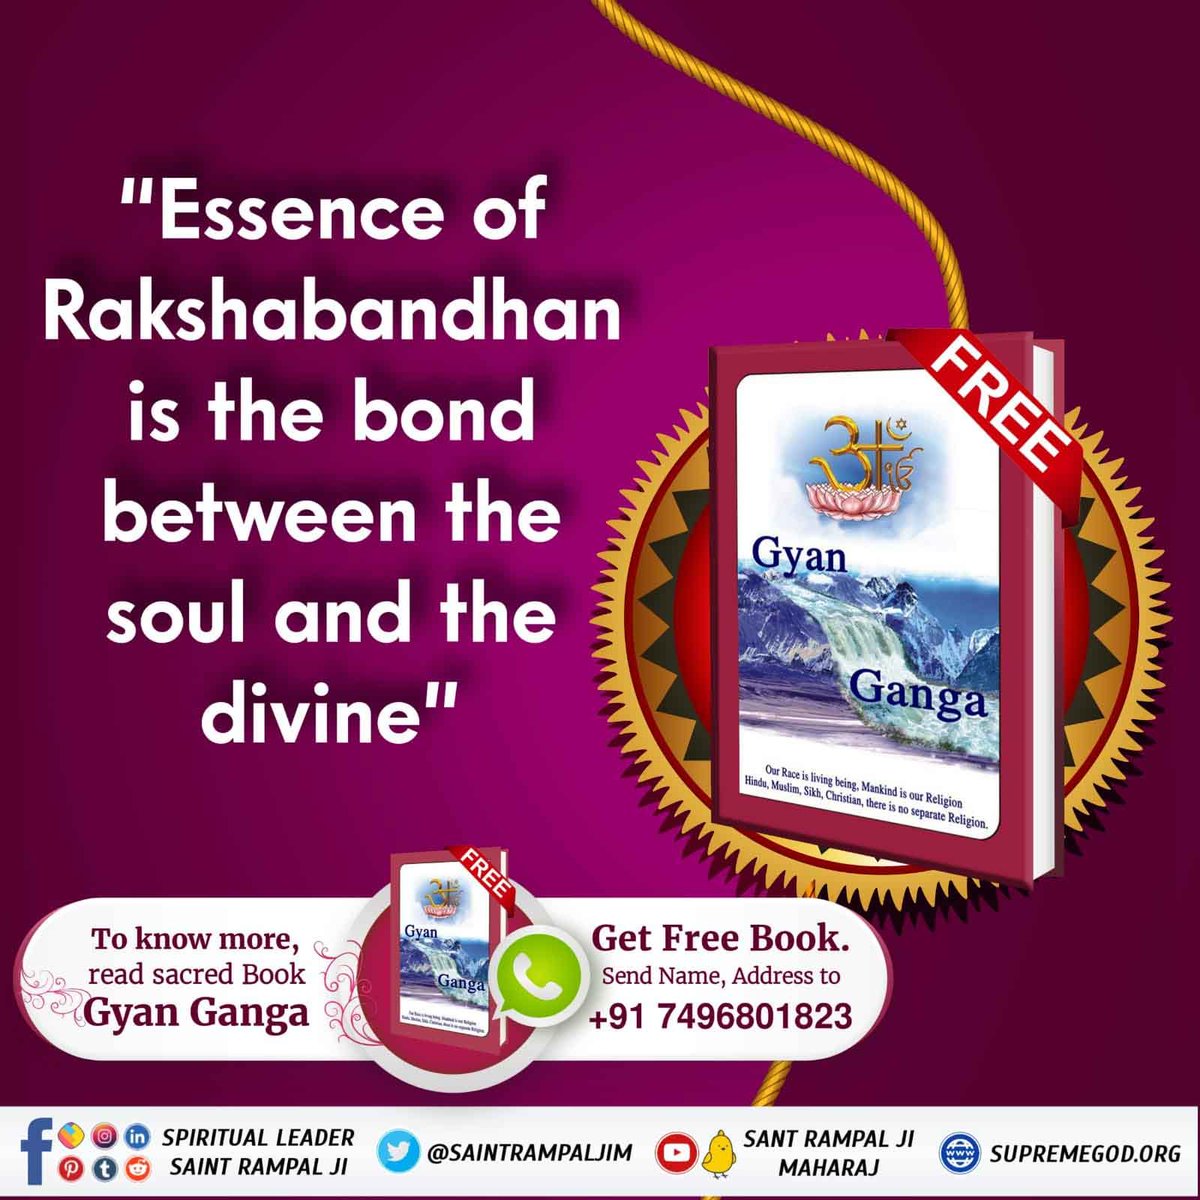 .
#GodMorningWednesday
#अविनाशी_परमात्मा_कबीर

Essence of Rakshabandhan 
is the bond between the soul and the divine'

To know more, read sacred Book Gyan Ganga Get Free Book. Send Name, Address to +917496801823